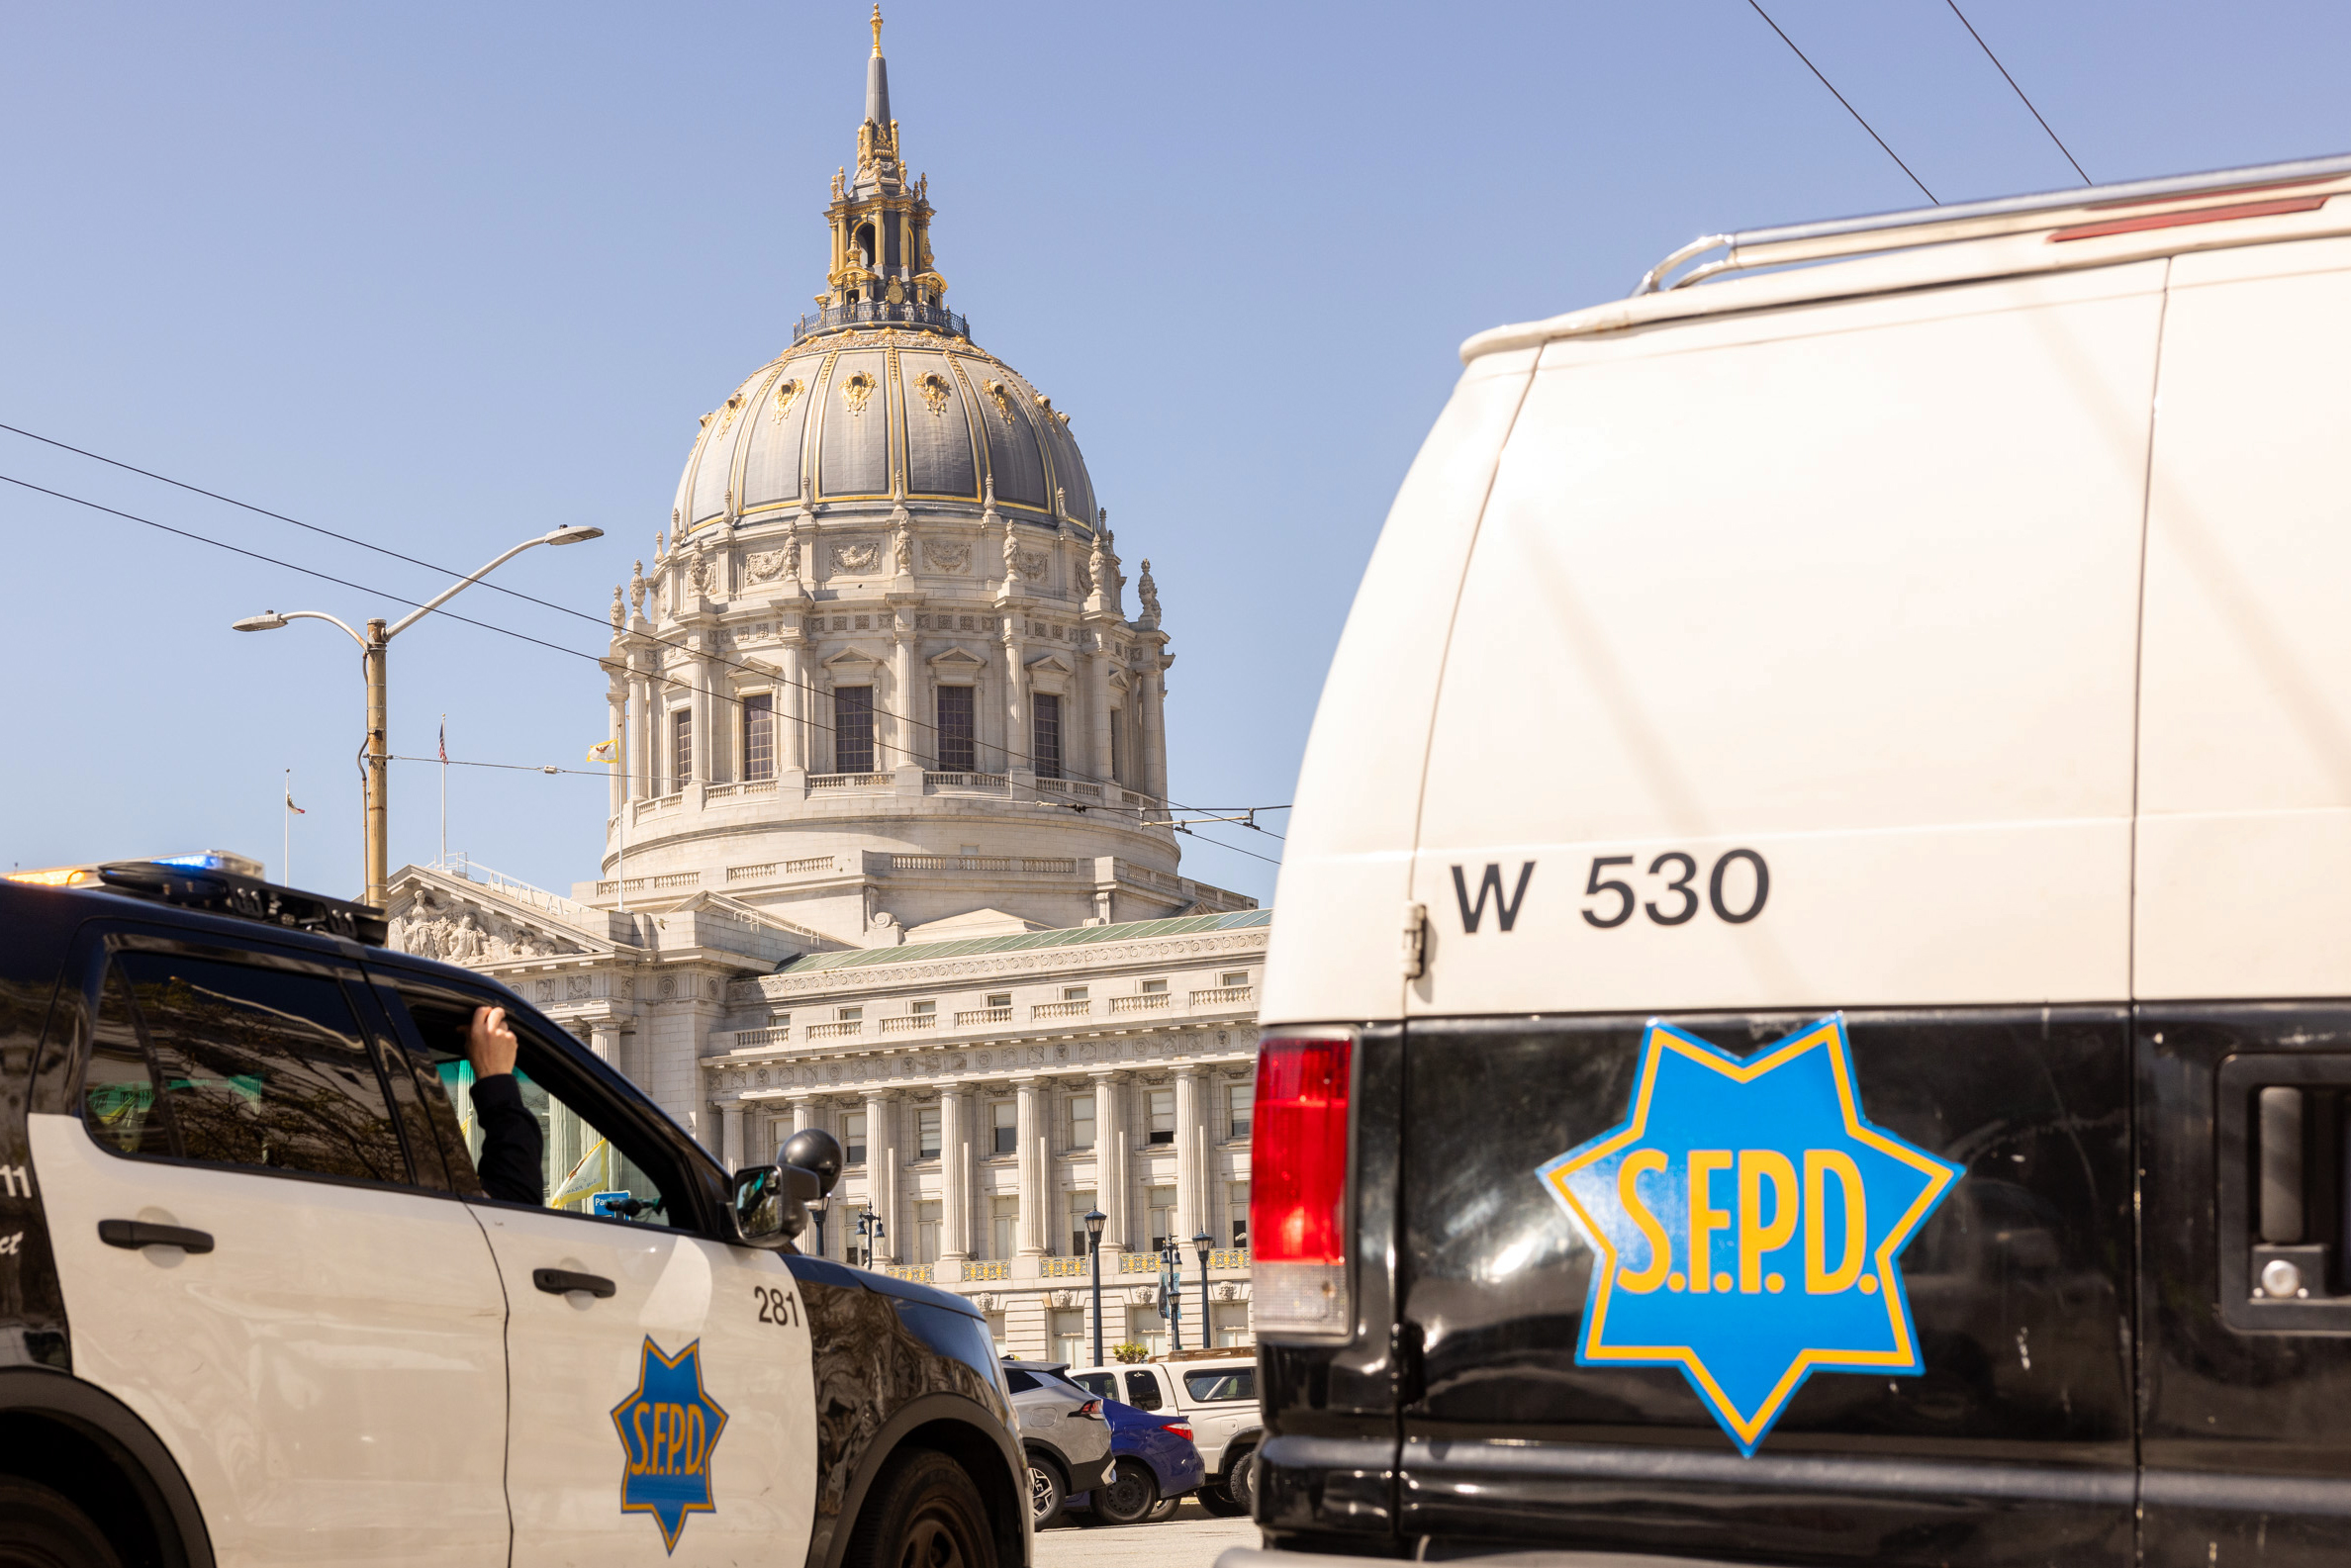 The image shows a grand domed building with intricate architecture in the background and two police vehicles labeled &quot;S.F.P.D.&quot; in the foreground.